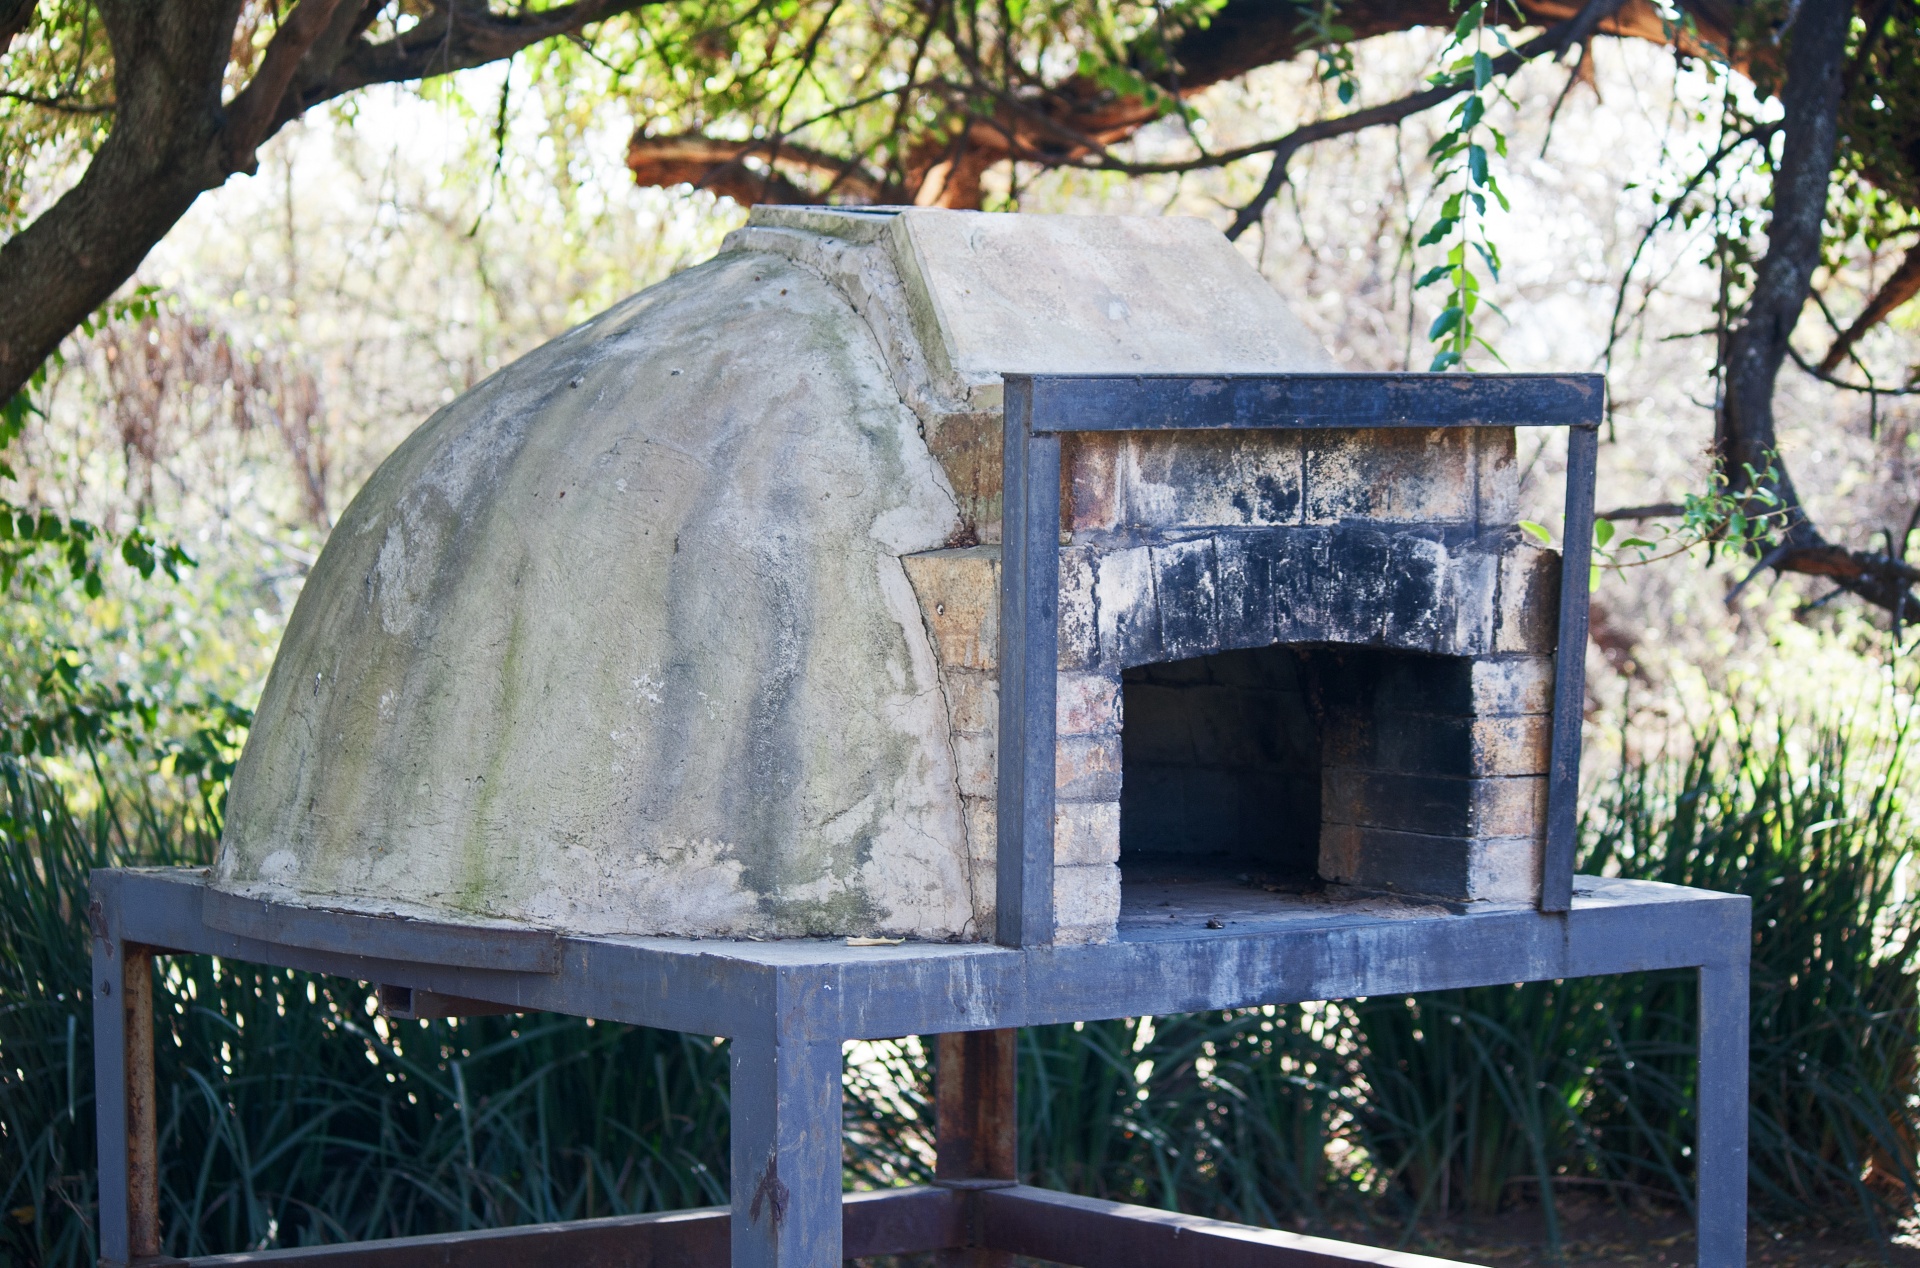 View Of An Outdoors Pizza Oven